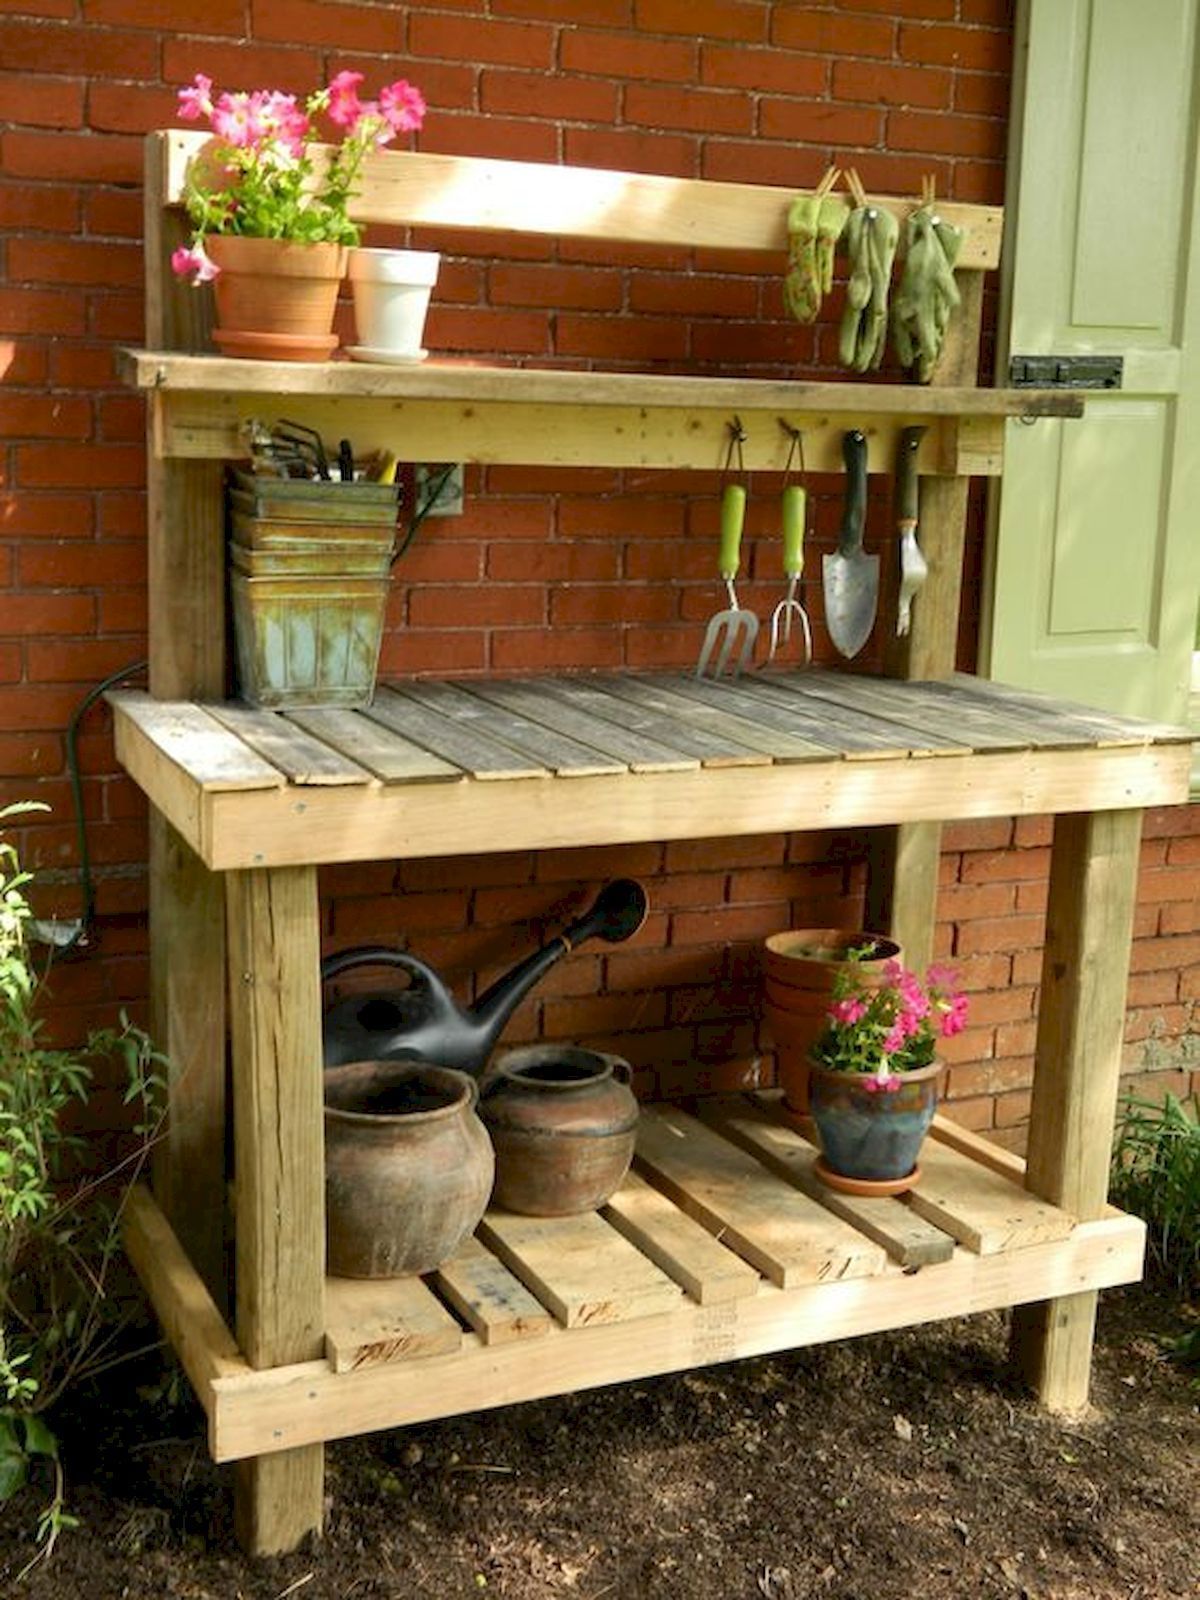 60 Awesome DIY Pallet Garden Bench and Storage Design Ideas - 60 Awesome DIY Pallet Garden Bench and Storage Design Ideas -   17 diy Table garden ideas